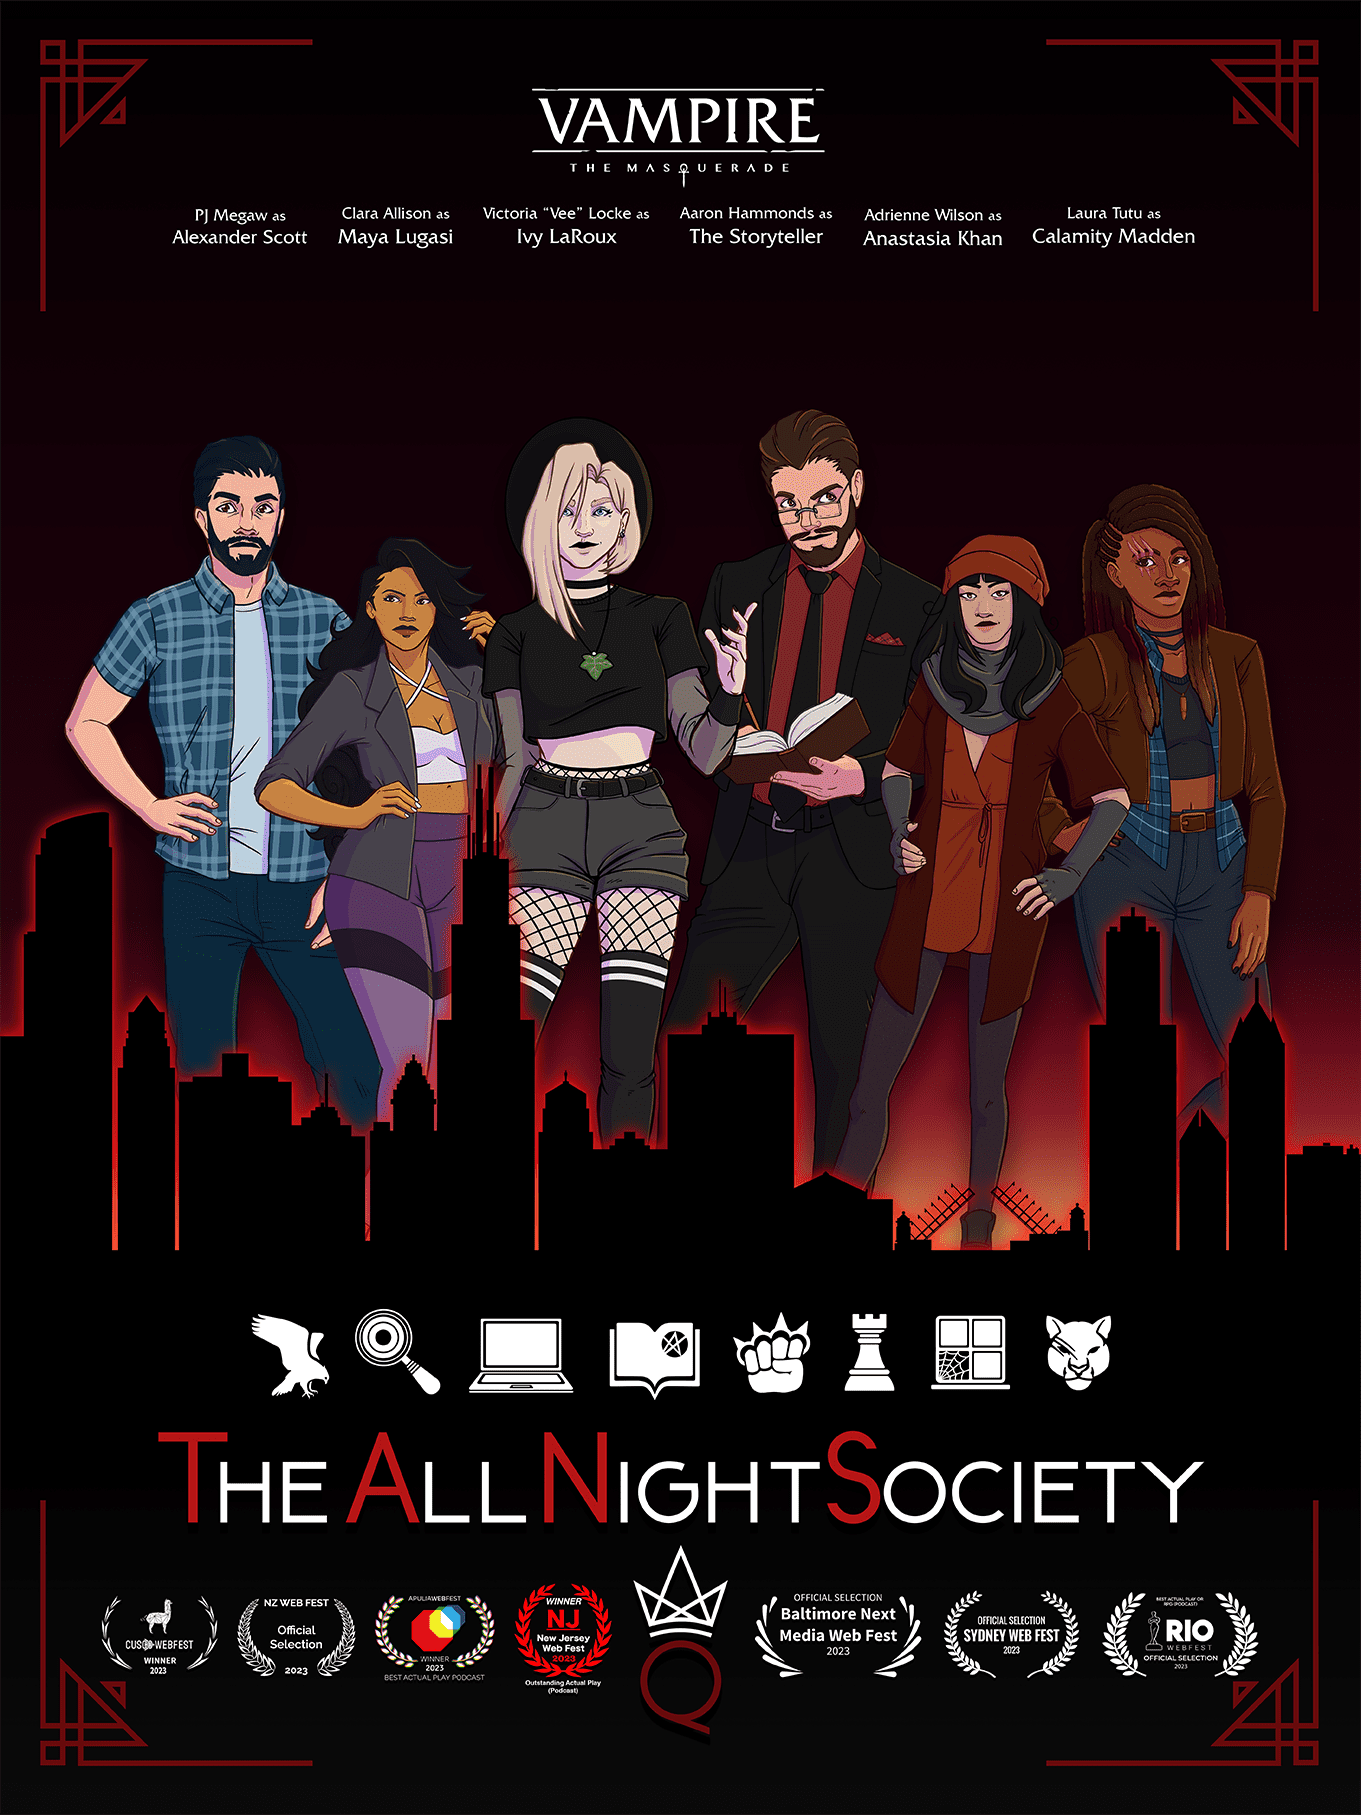 A poster for The All Night Society showing six main characters, and a number of awards